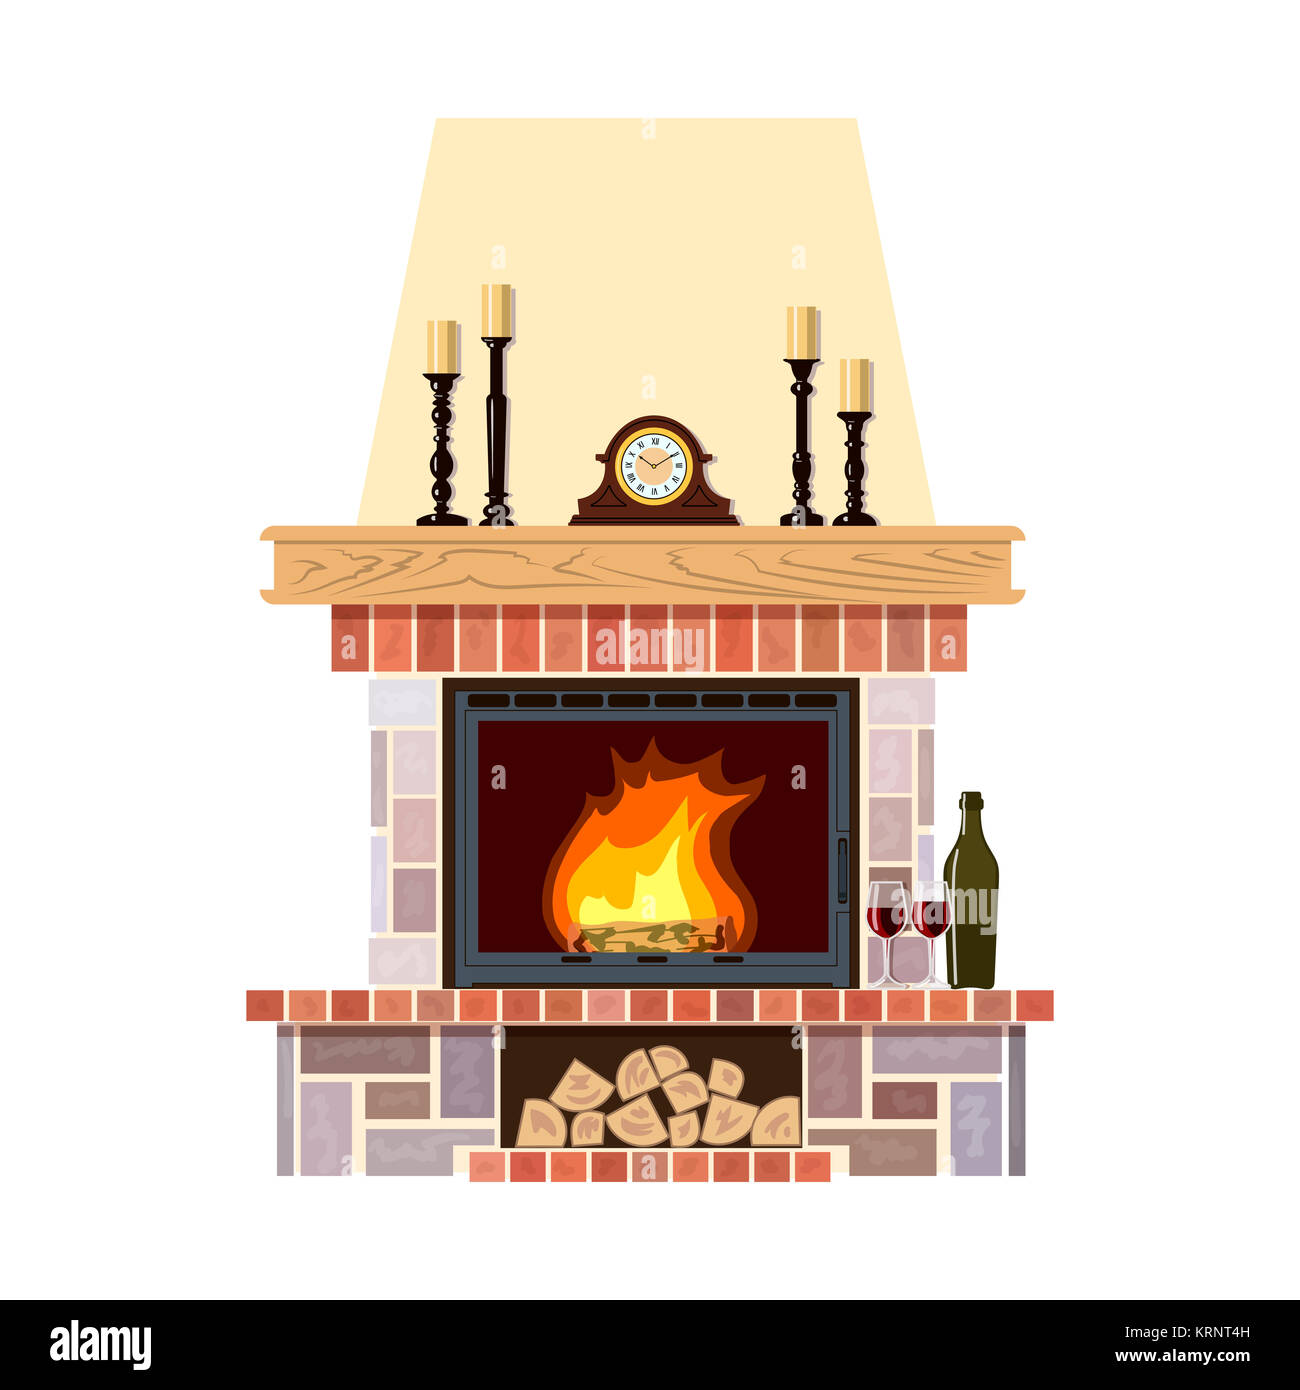 Cozy flaming fireplace Stock Photo